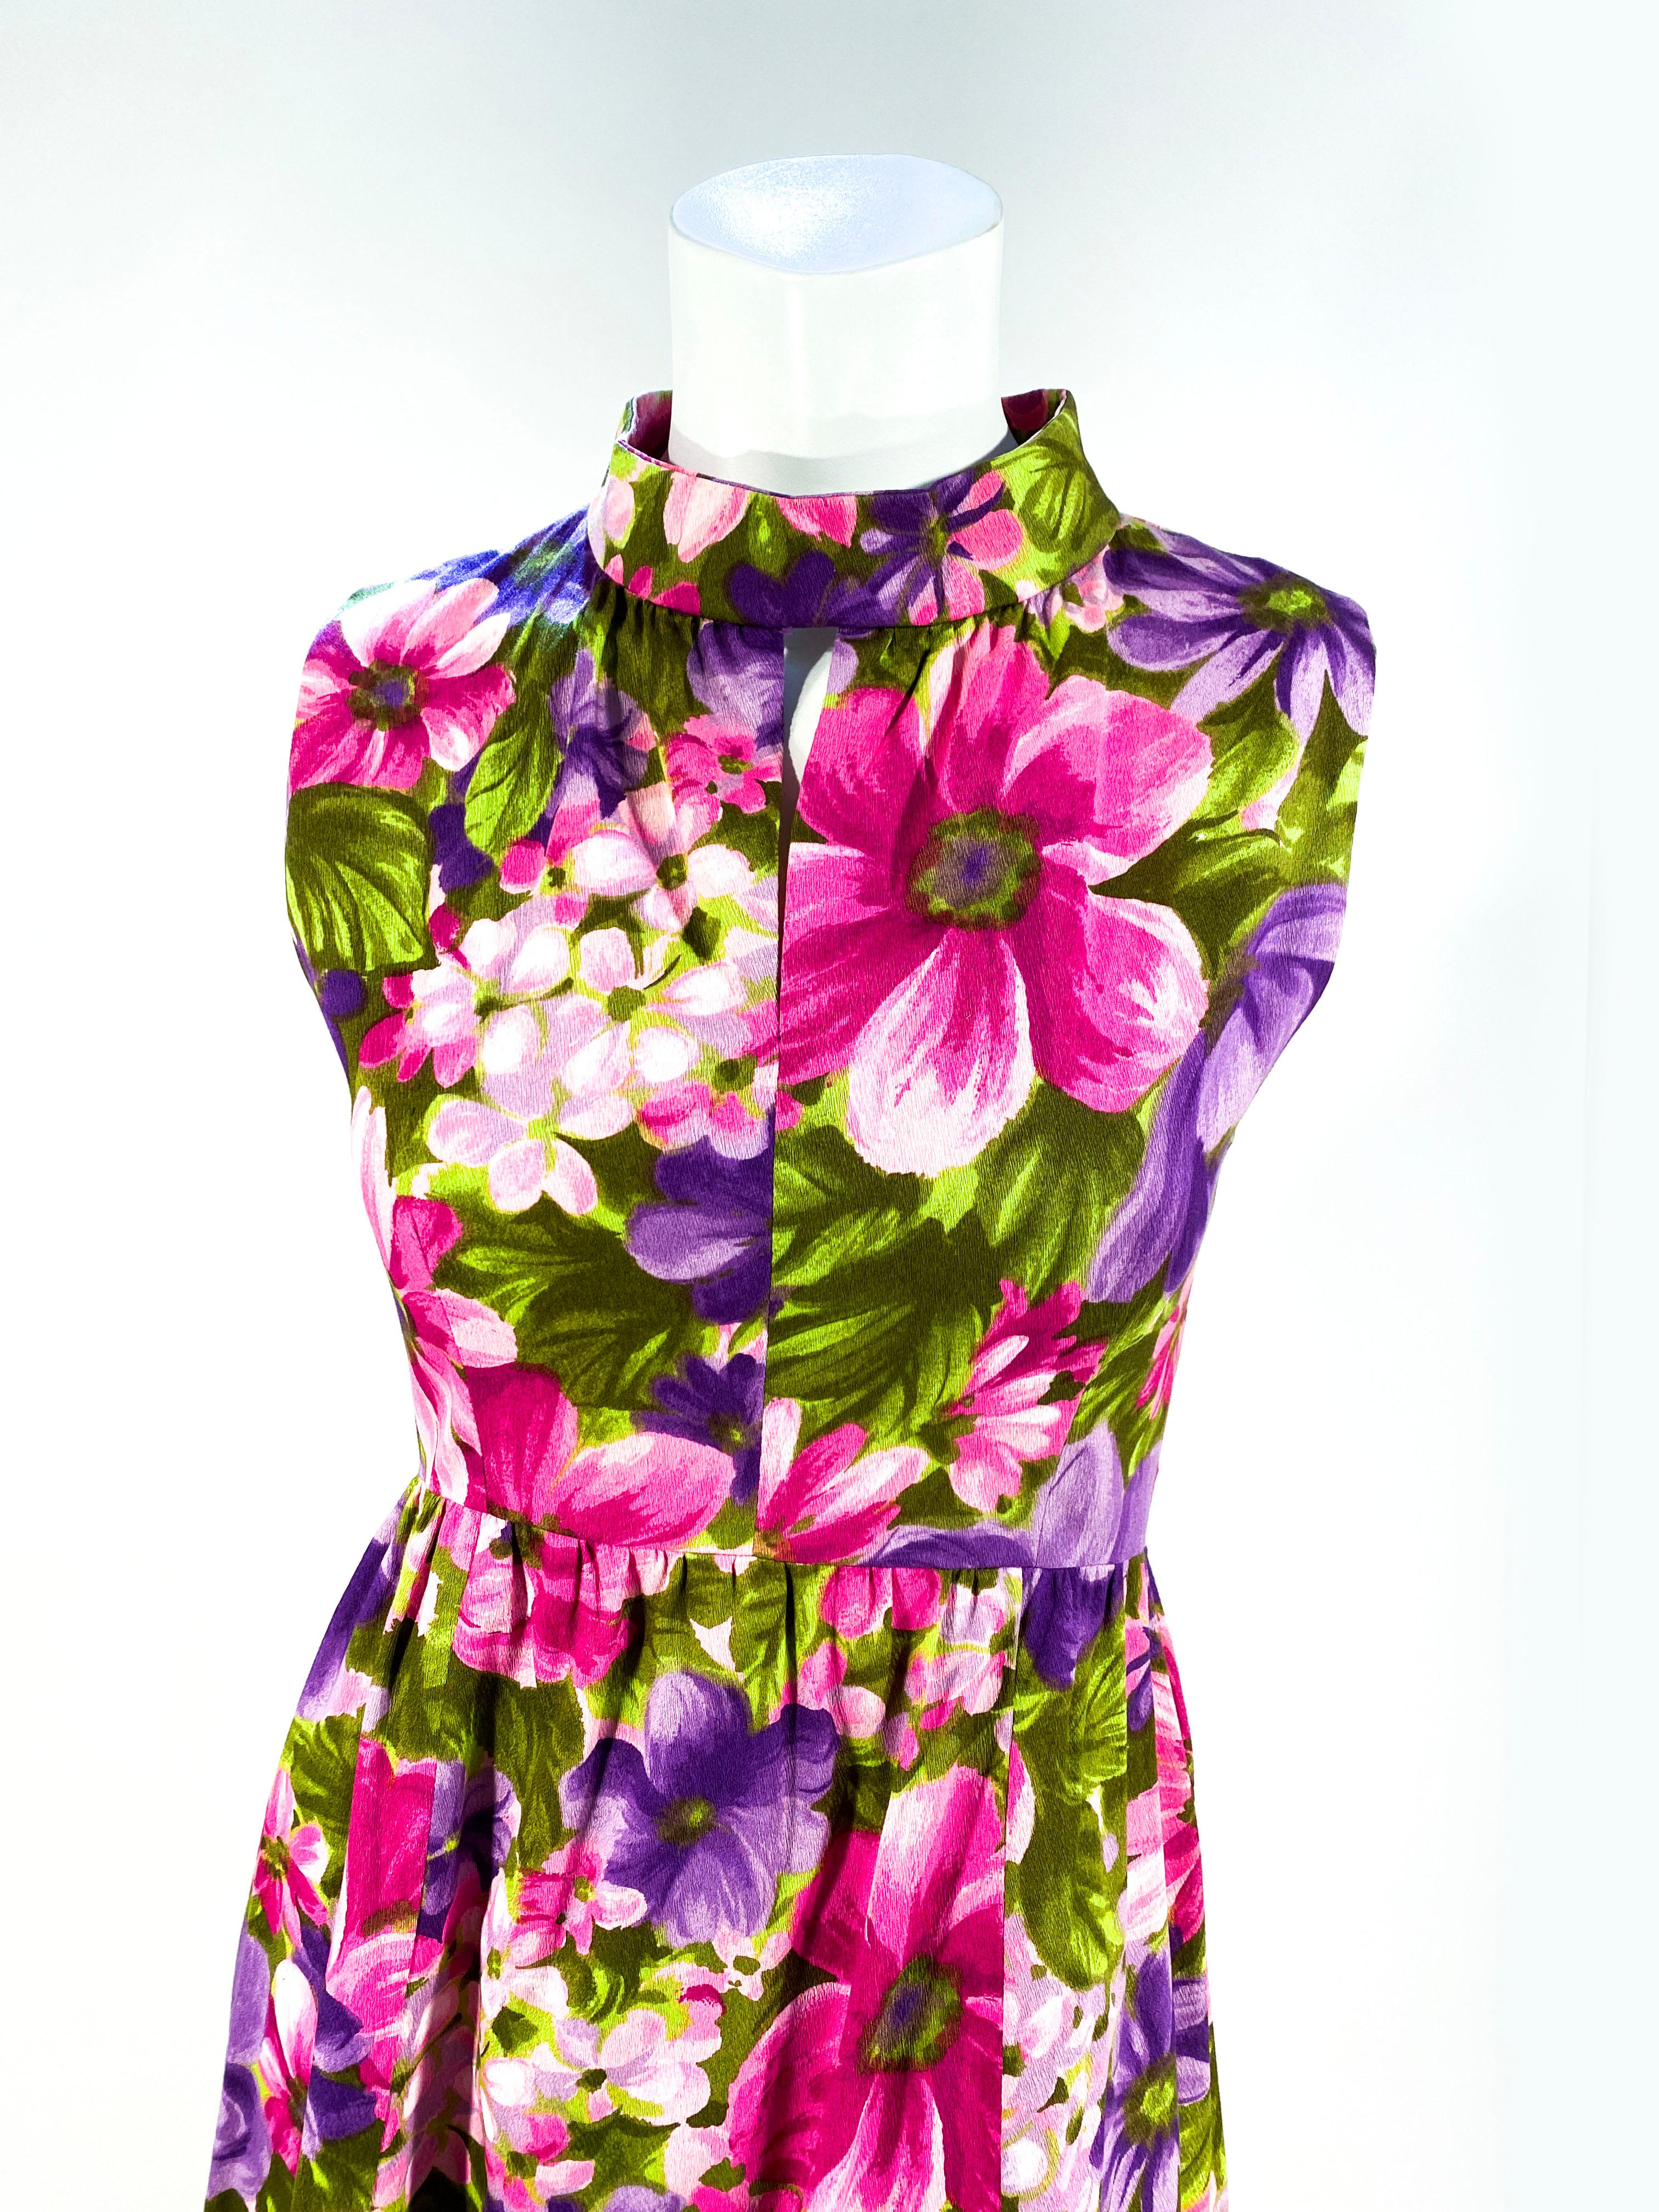 1960s dress featuring an impressionist floral print in vibrant sades of purple, pink, and green. The bodice has a mock turtle neck and a keyhole opening cut out. The fabric is a medium weight cotton.